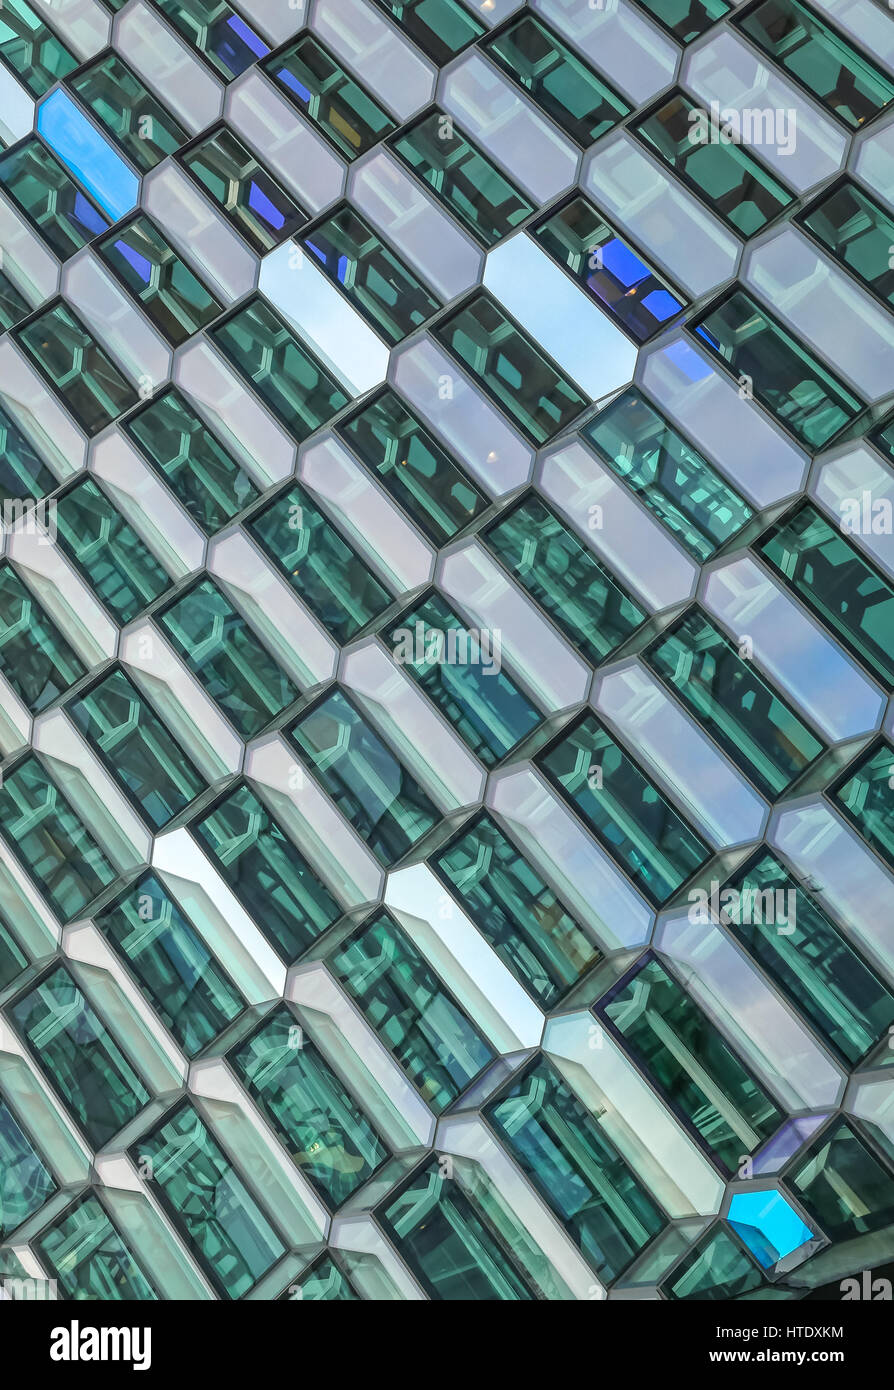 Close up view of windows with abstract design, Harpa Concert Hall, Rekjavik, Iceland, designed by Olafur Eliasson Stock Photo